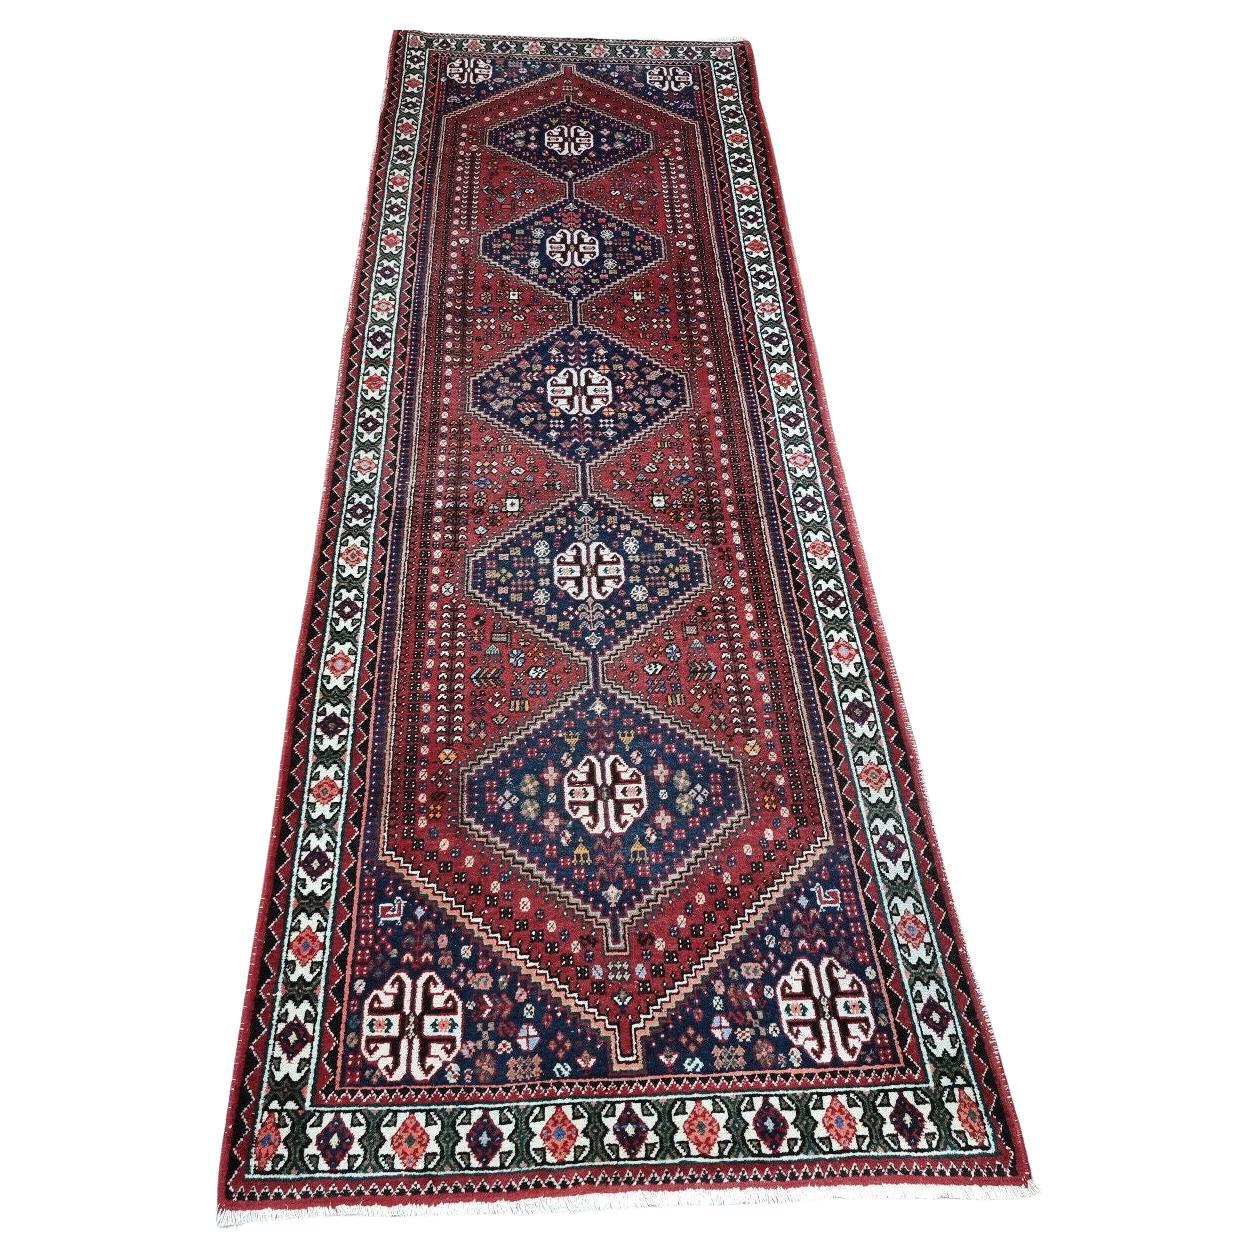 Handmade Vintage Persian Style Shiraz Rug 3.1' x 9.2', 1960s - 1D99 For Sale